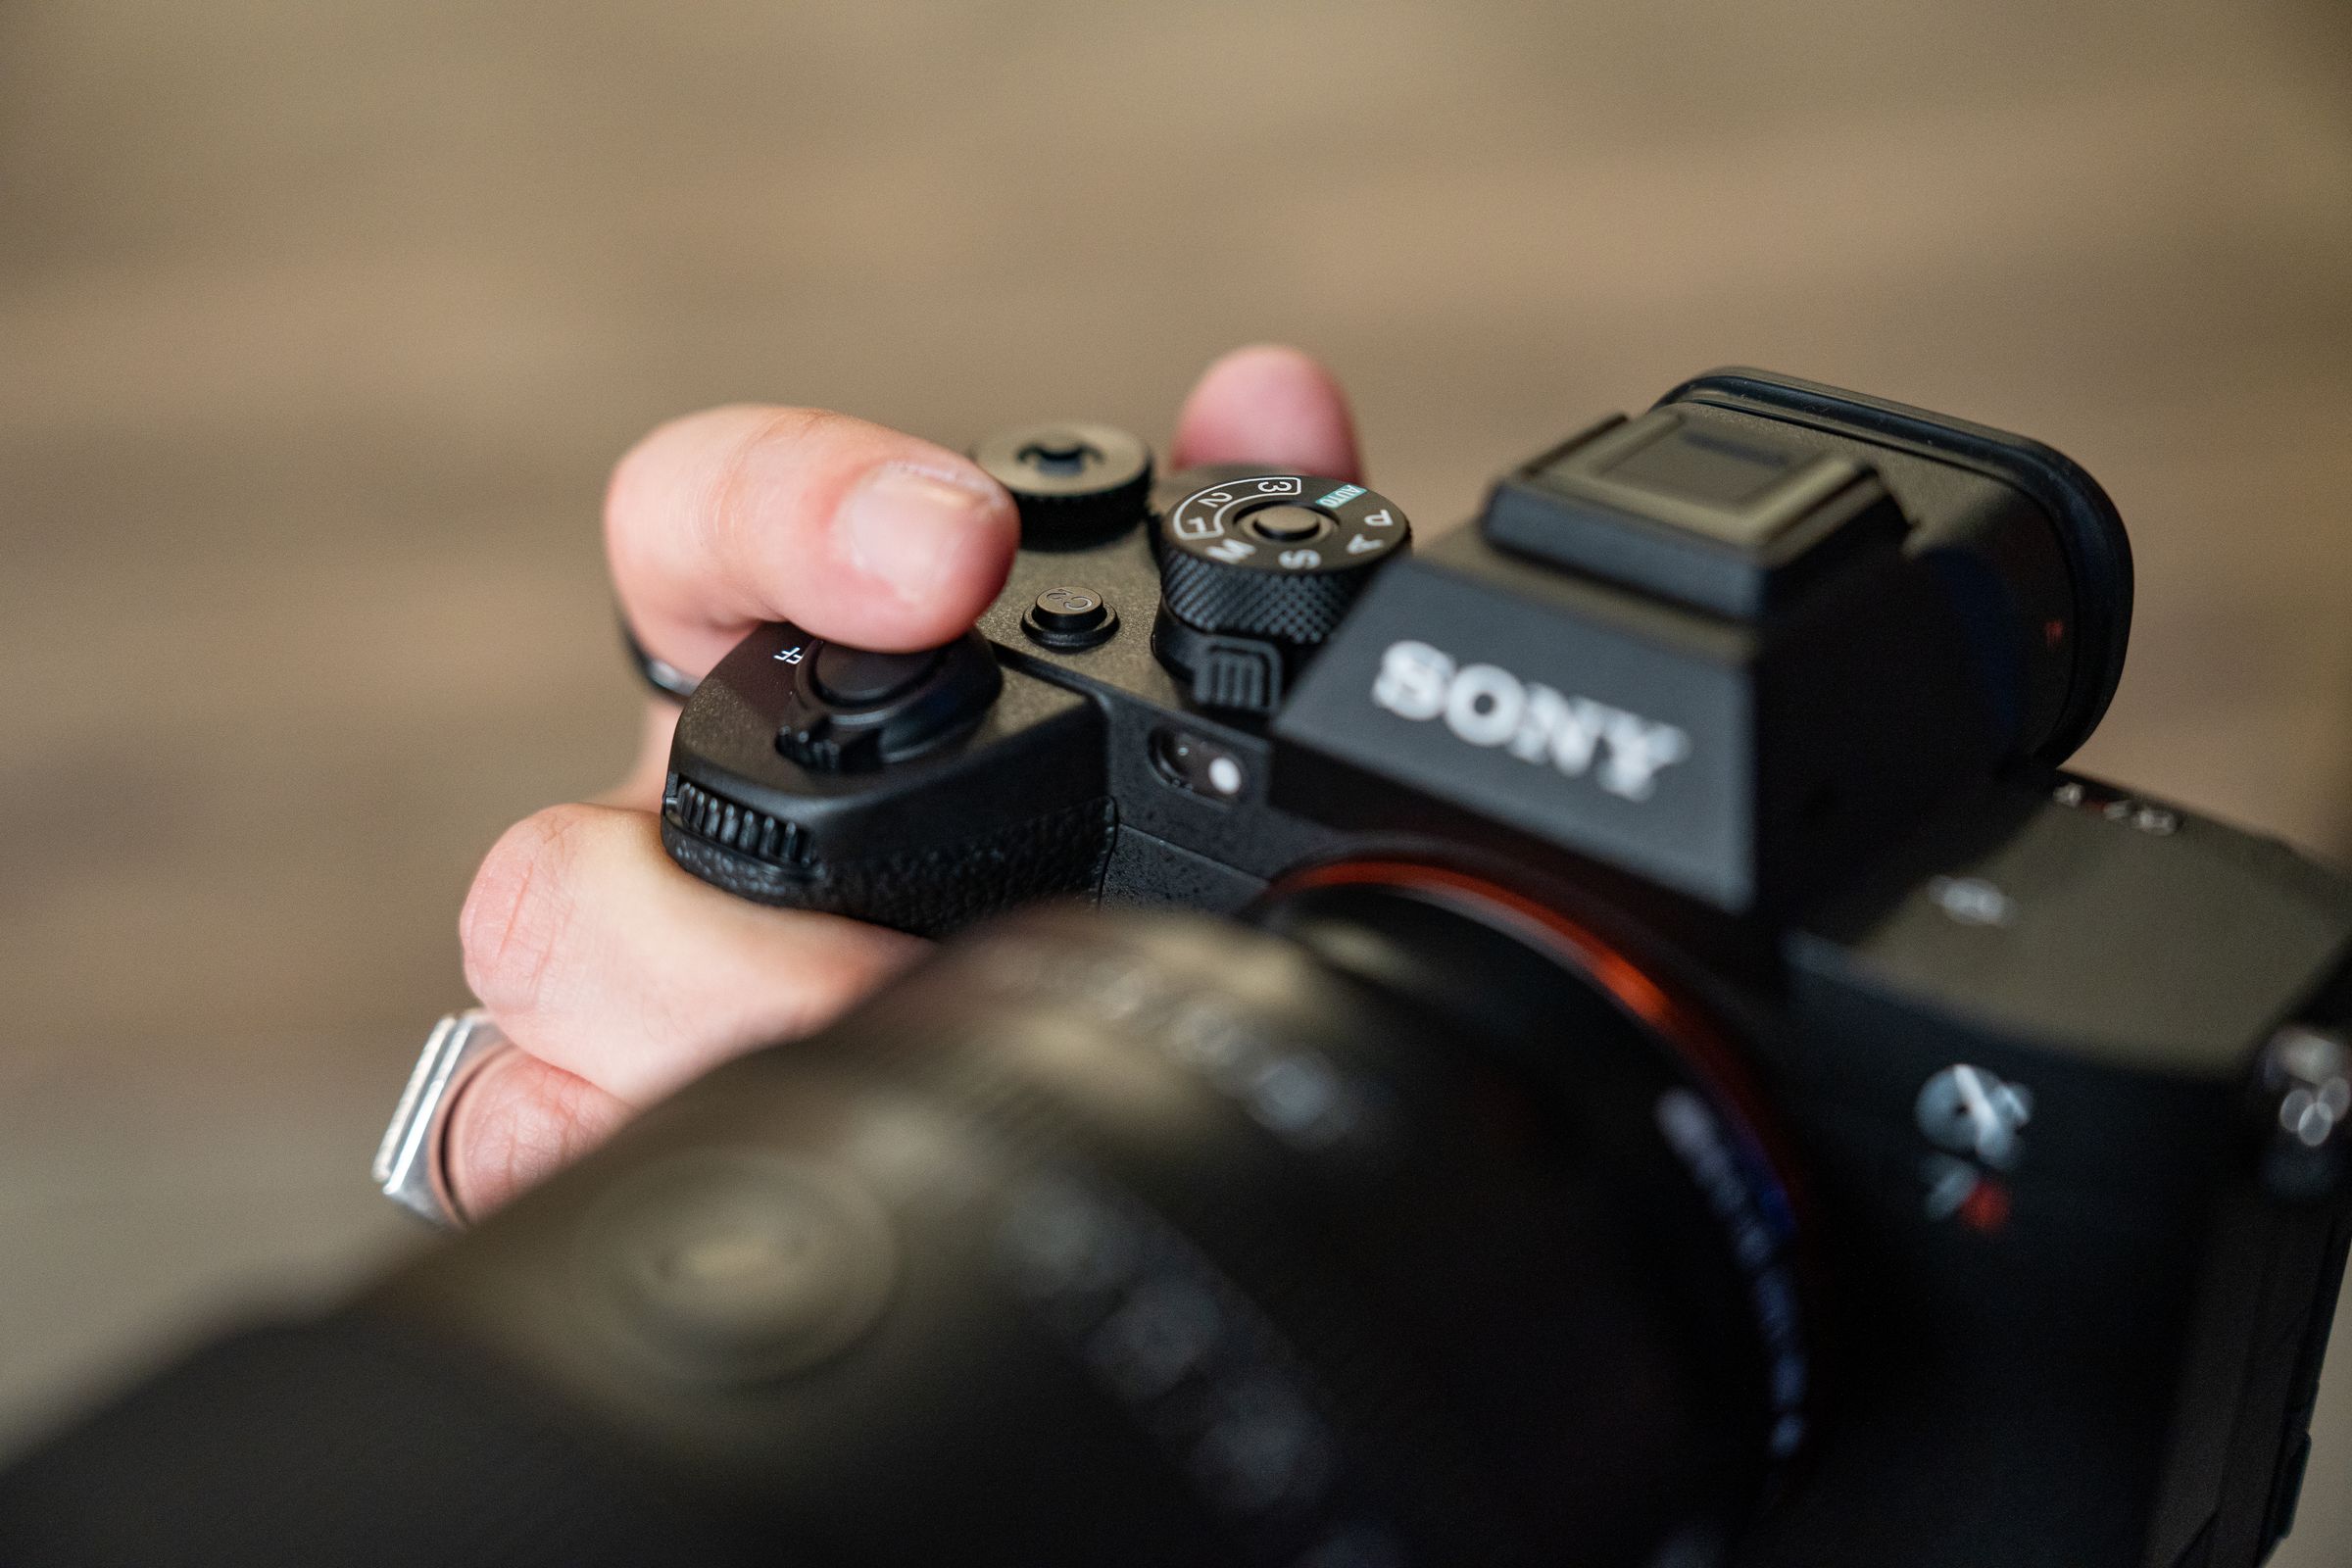 Since the A7R V nearly matches the A7 IV body, I can tell you that the ergonomics on the grip are still not great. It has that pain point below the shutter button where using it for a full day with heavier lenses will leave your middle-finger feeling sore.